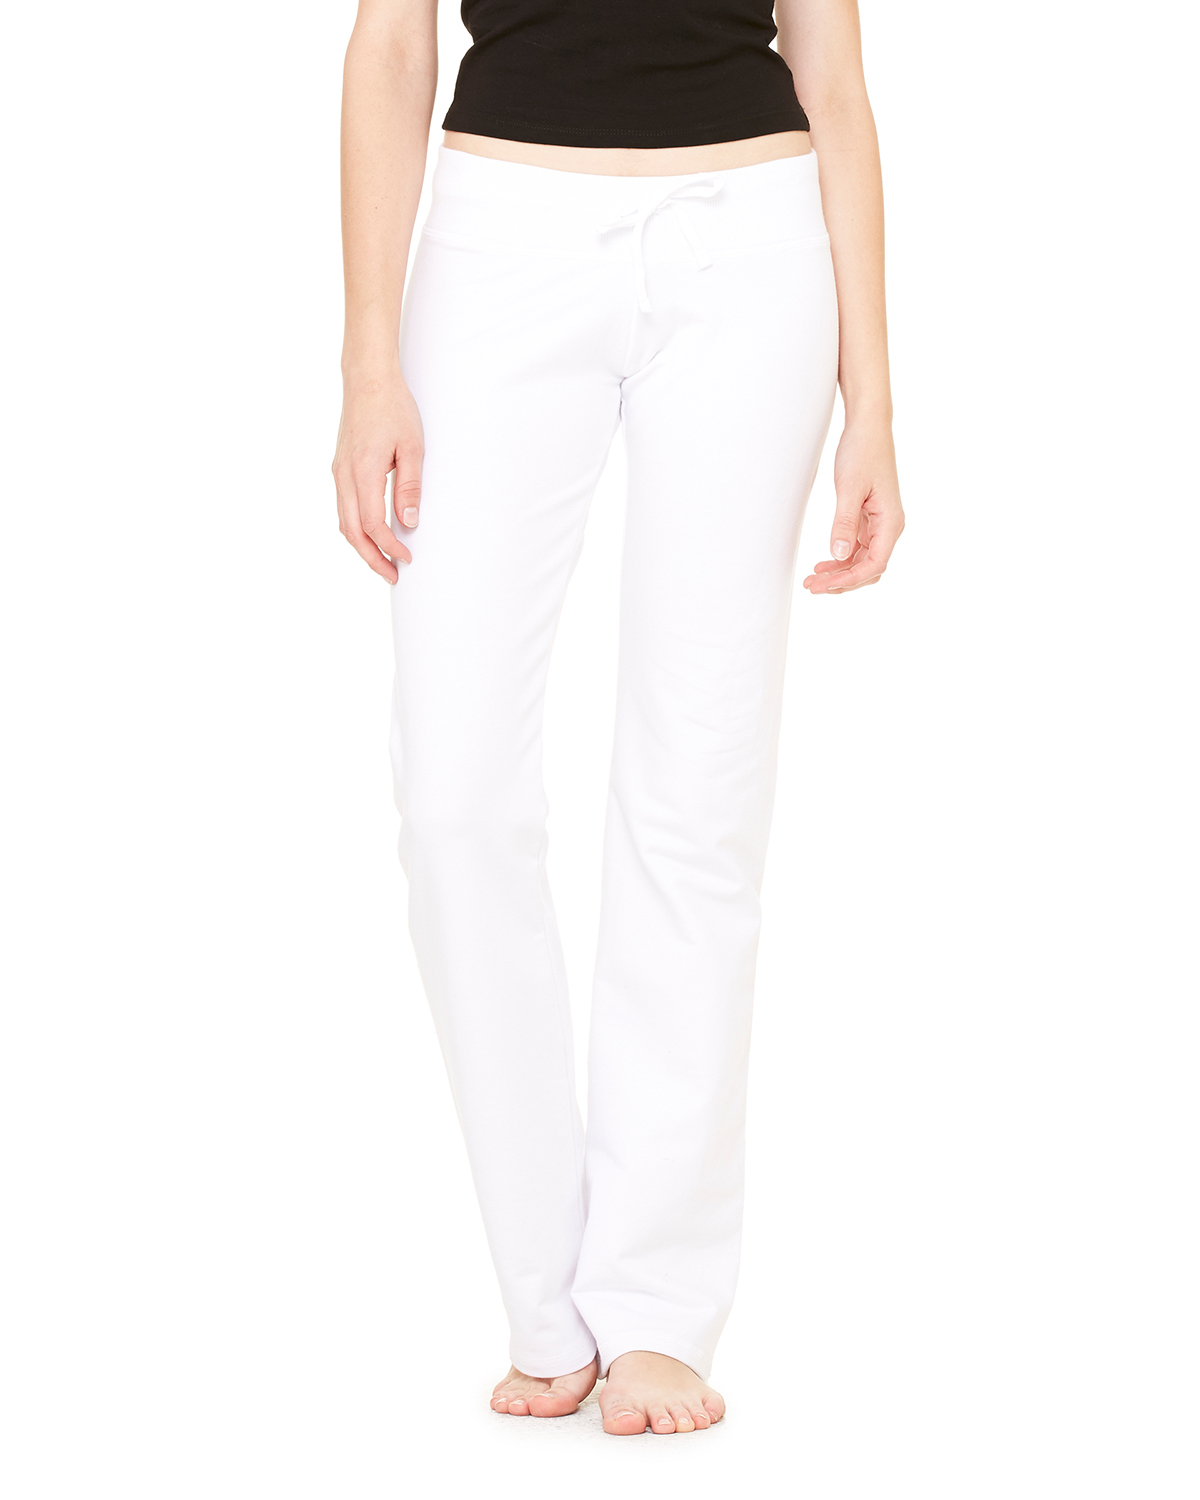 Bella 7217 Ladies' French Terry Lounge Pants